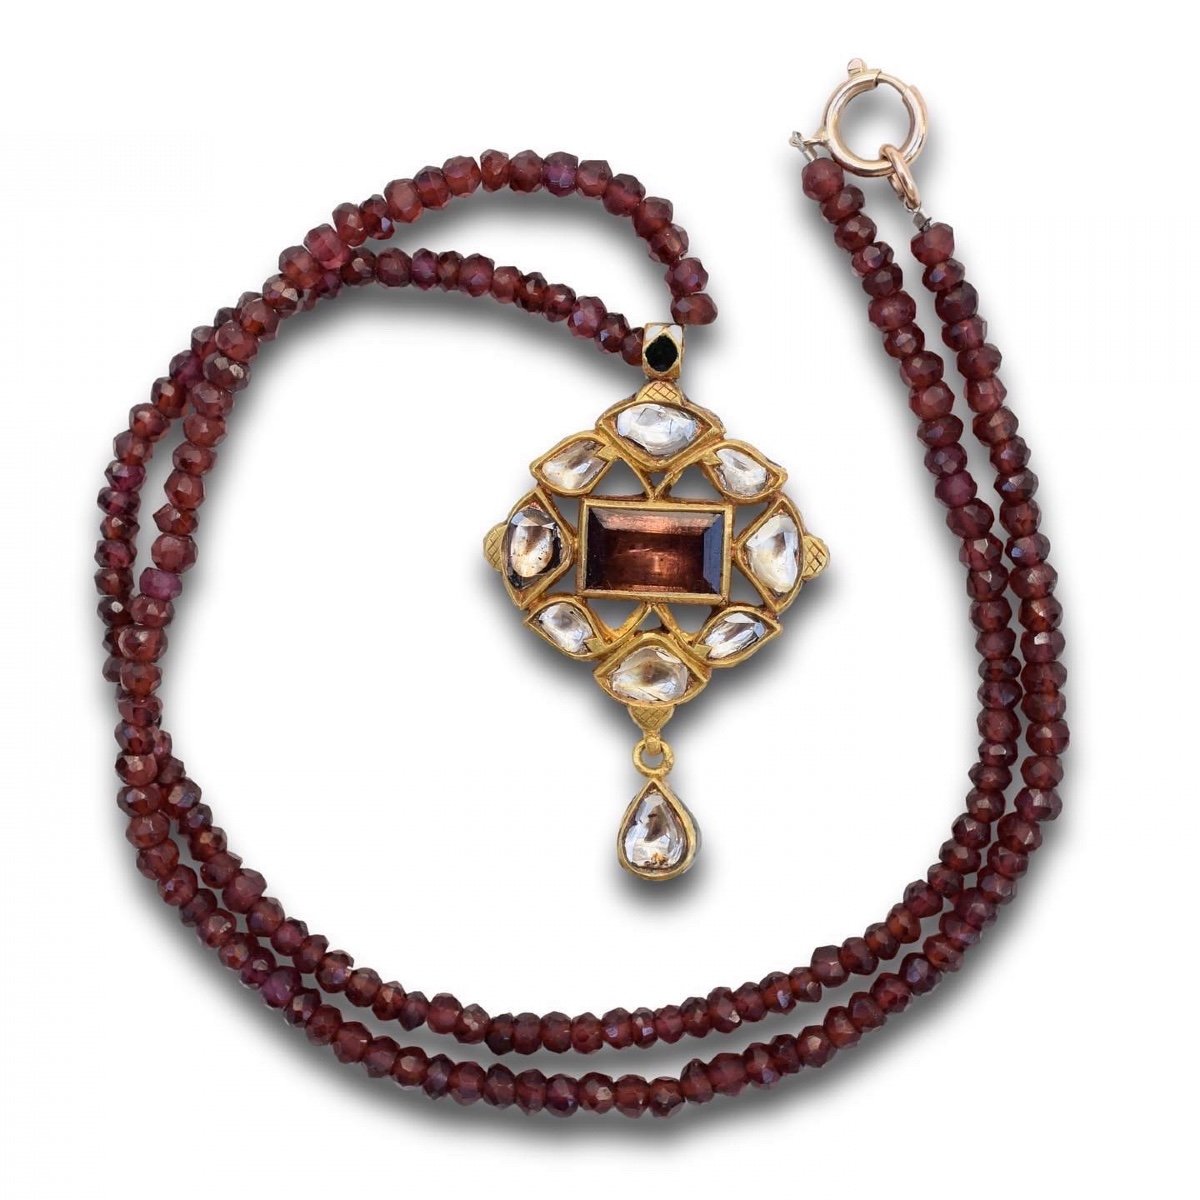 Enamel And Gold Pendant With Diamonds And A Table Cut Garnet. Indian, Circa 1900